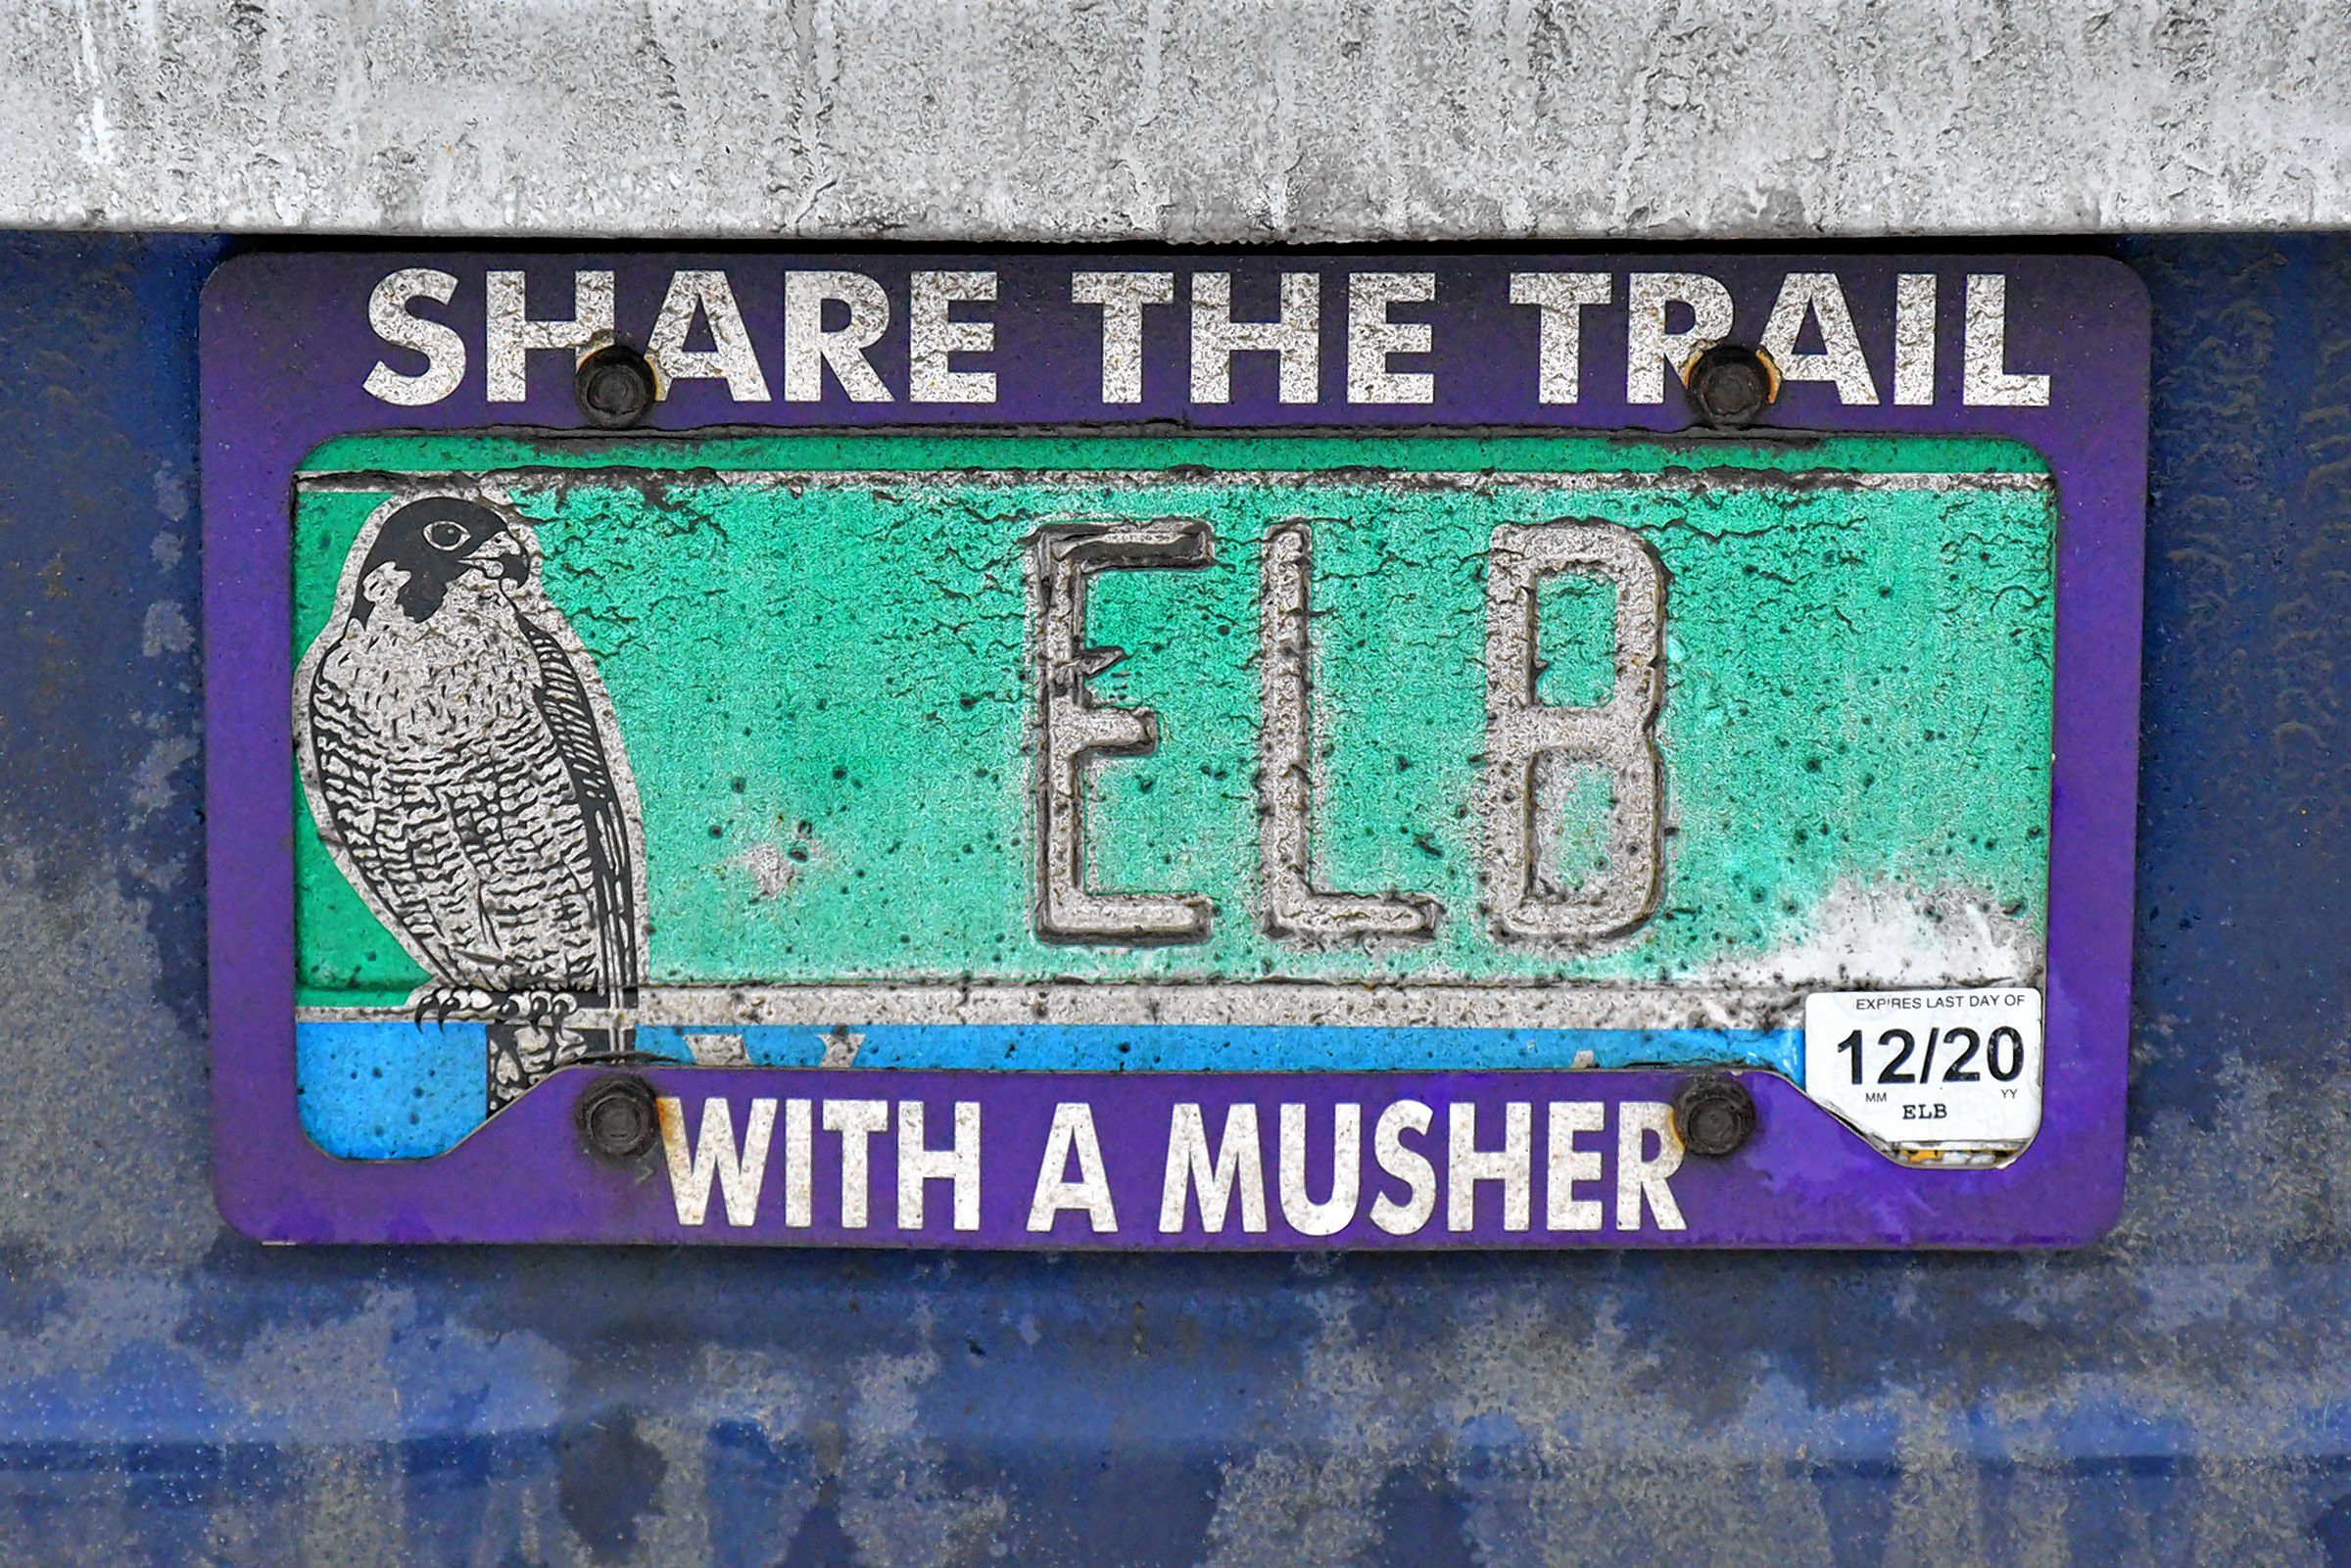 The license plate on the Braeburn Siberians company vehicle, parked in Claremont, N.H., on Sunday, Dec. 22, 2019. (Rick Russell photograph)